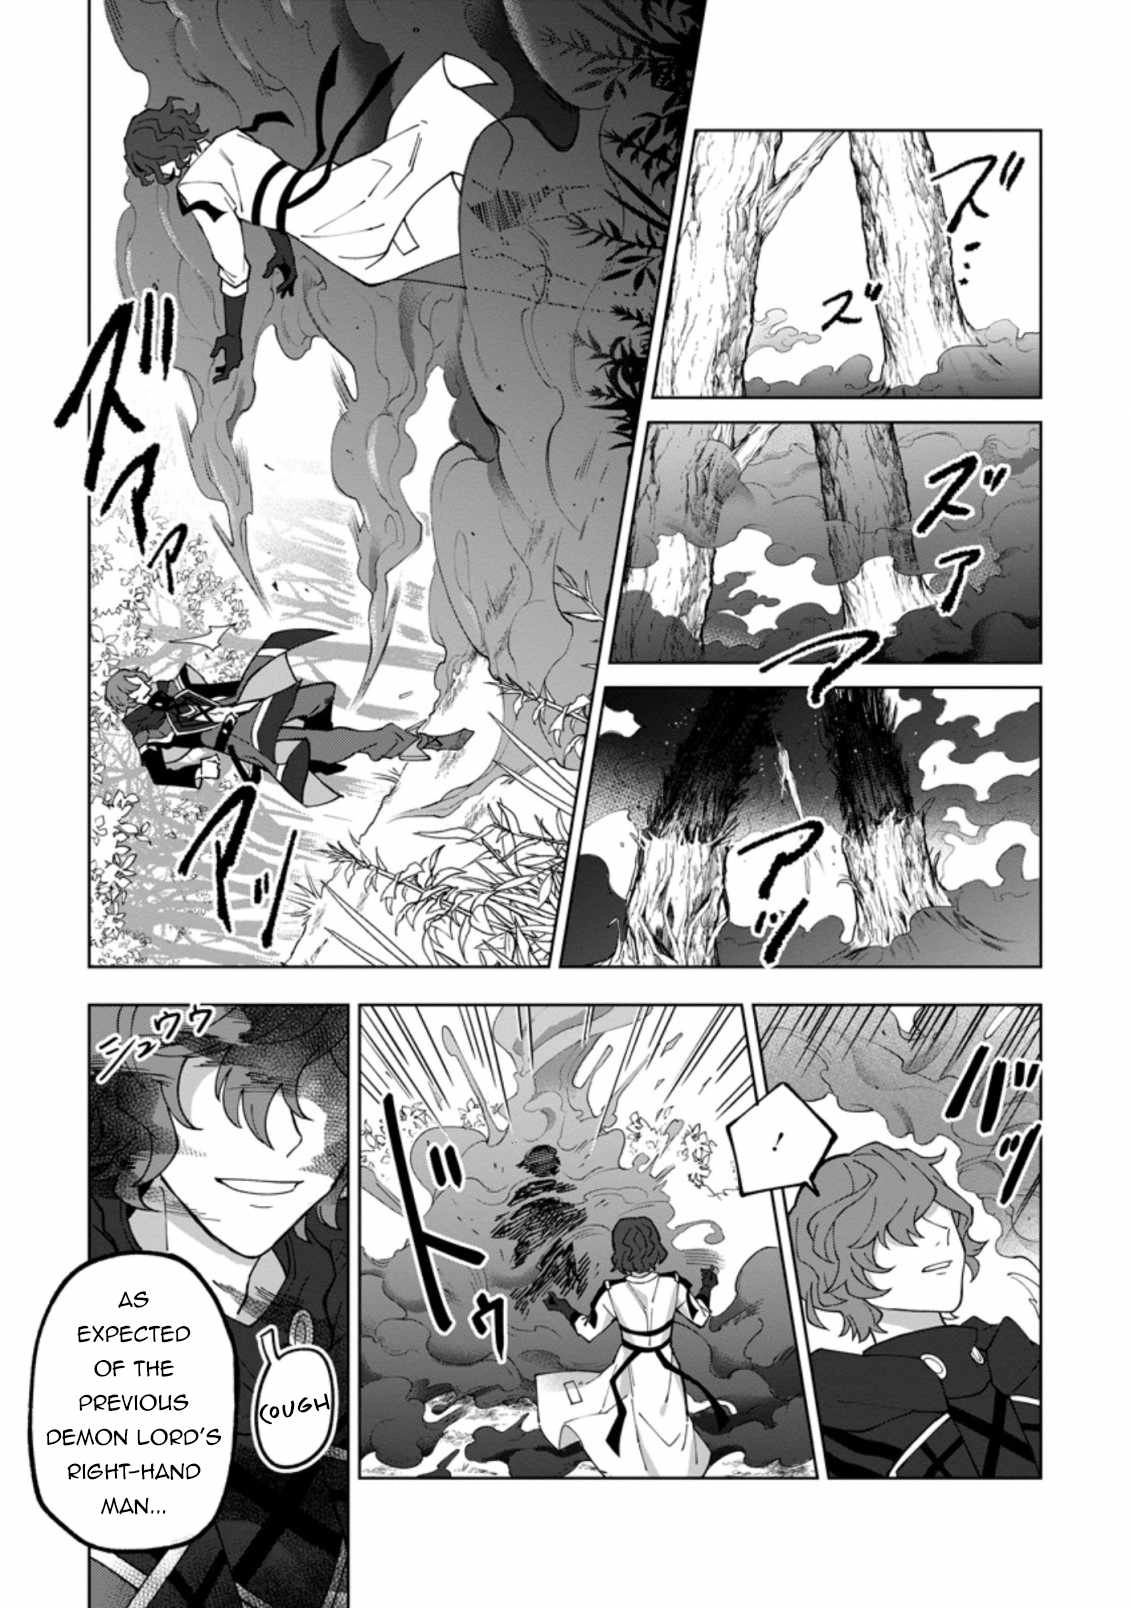 The White Mage Who Was Banished From the Hero's Party Is Picked up by an S Rank Adventurer ~ This White Mage Is Too Out of the Ordinary! Chapter 17.1